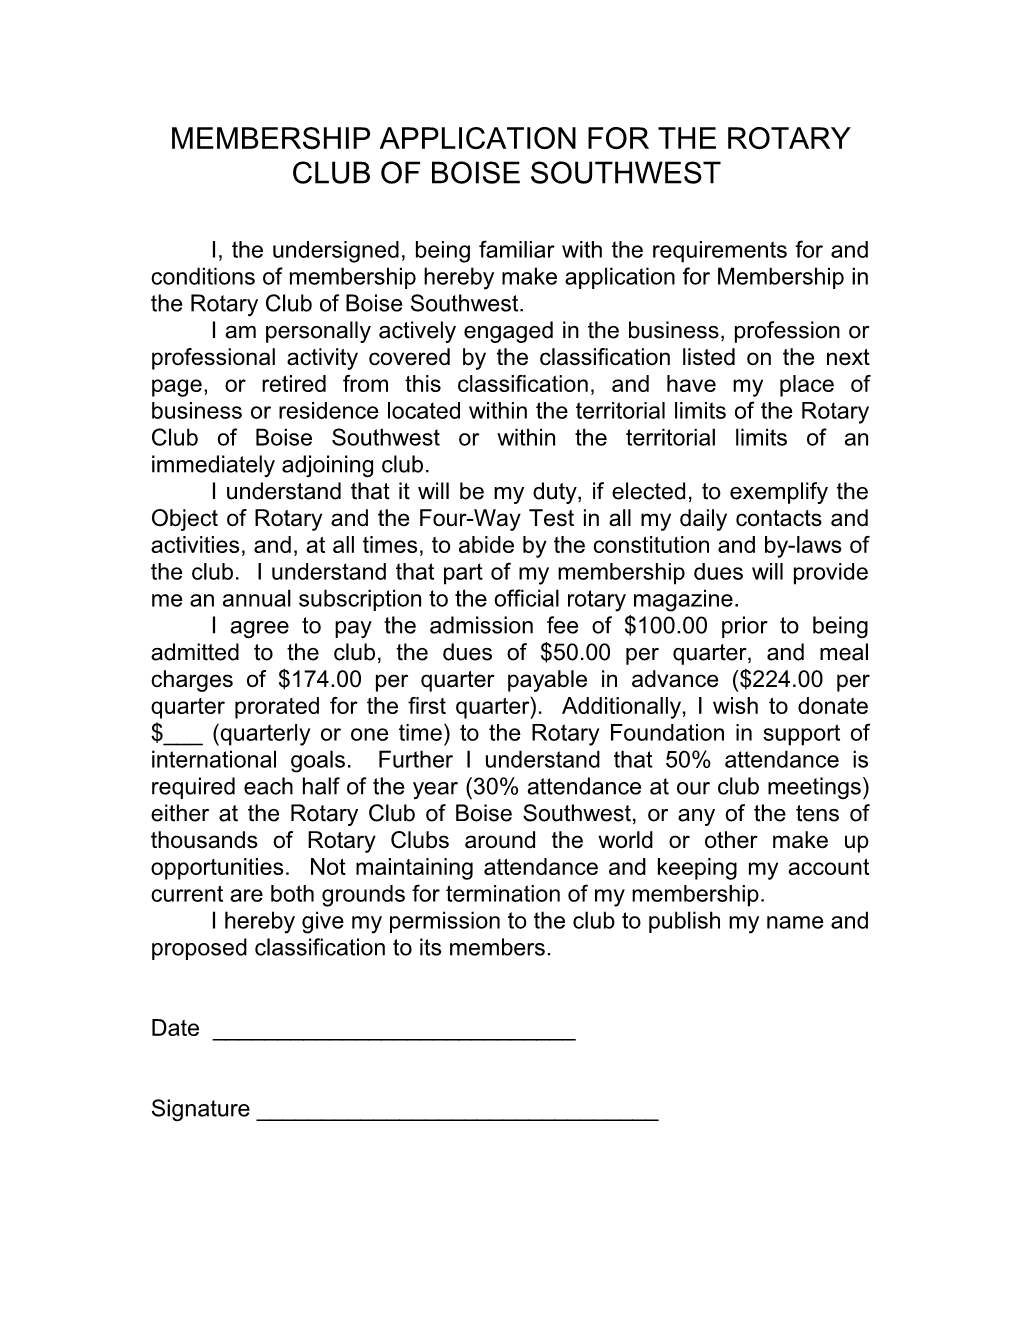 Membership Application for the Rotary Club of Southwest Orlando